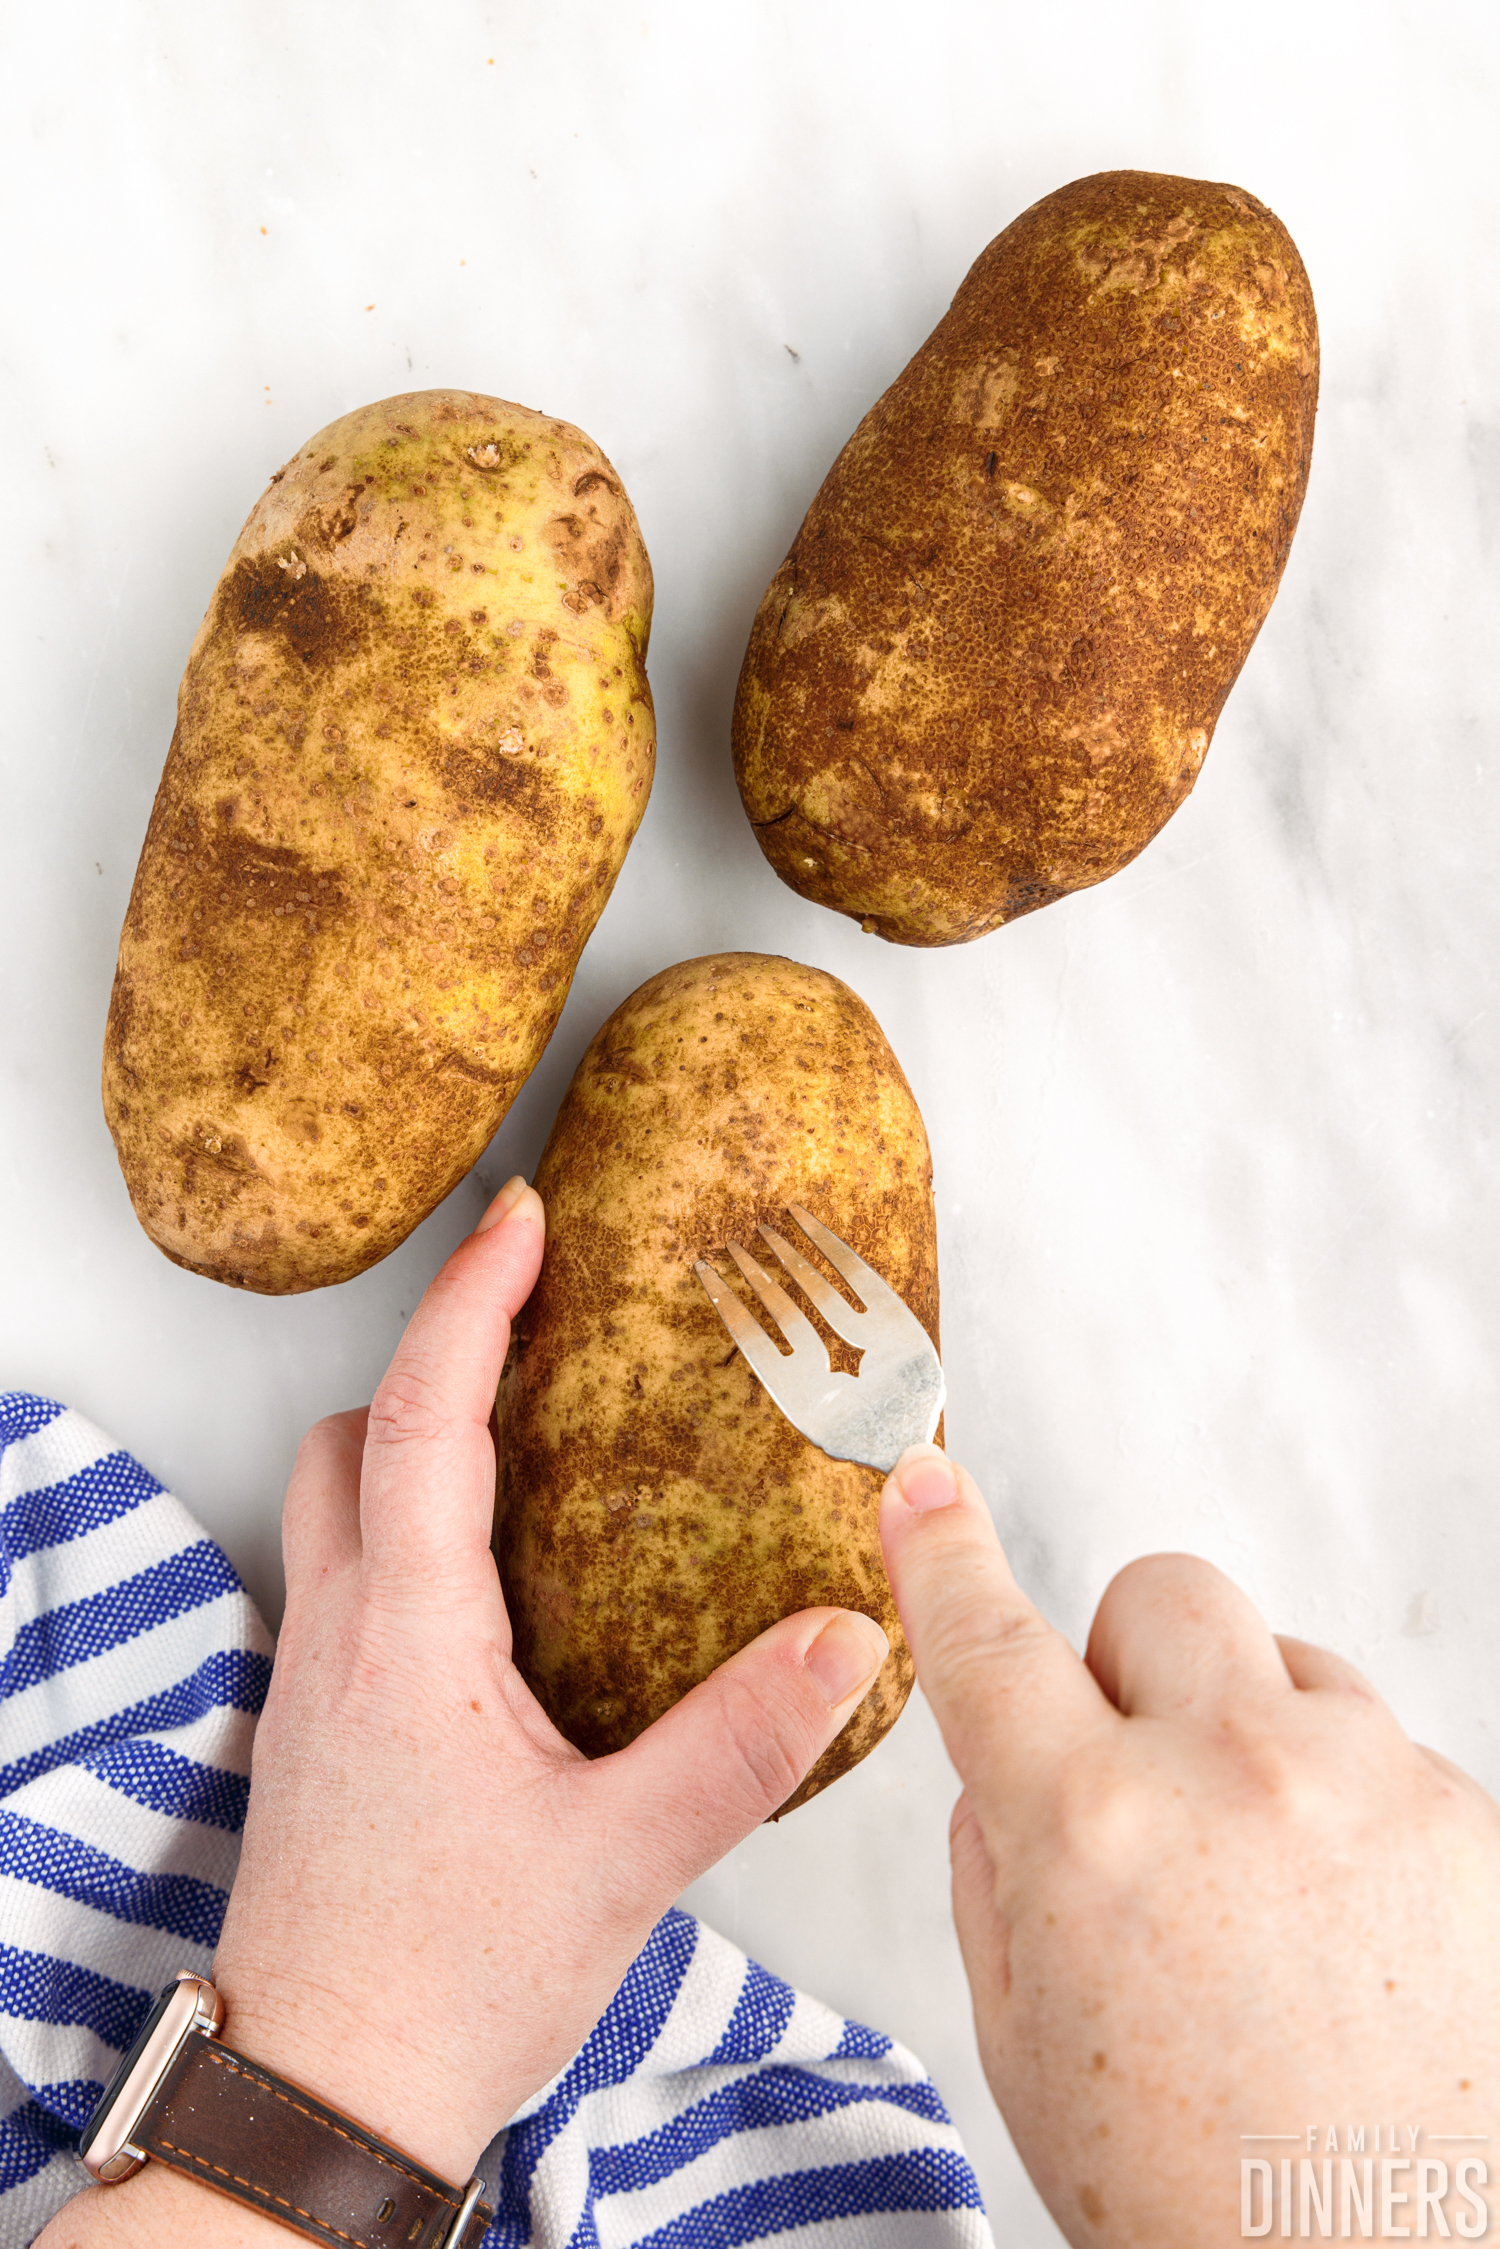 3 clean, raw potatoes being pierced by a fork.